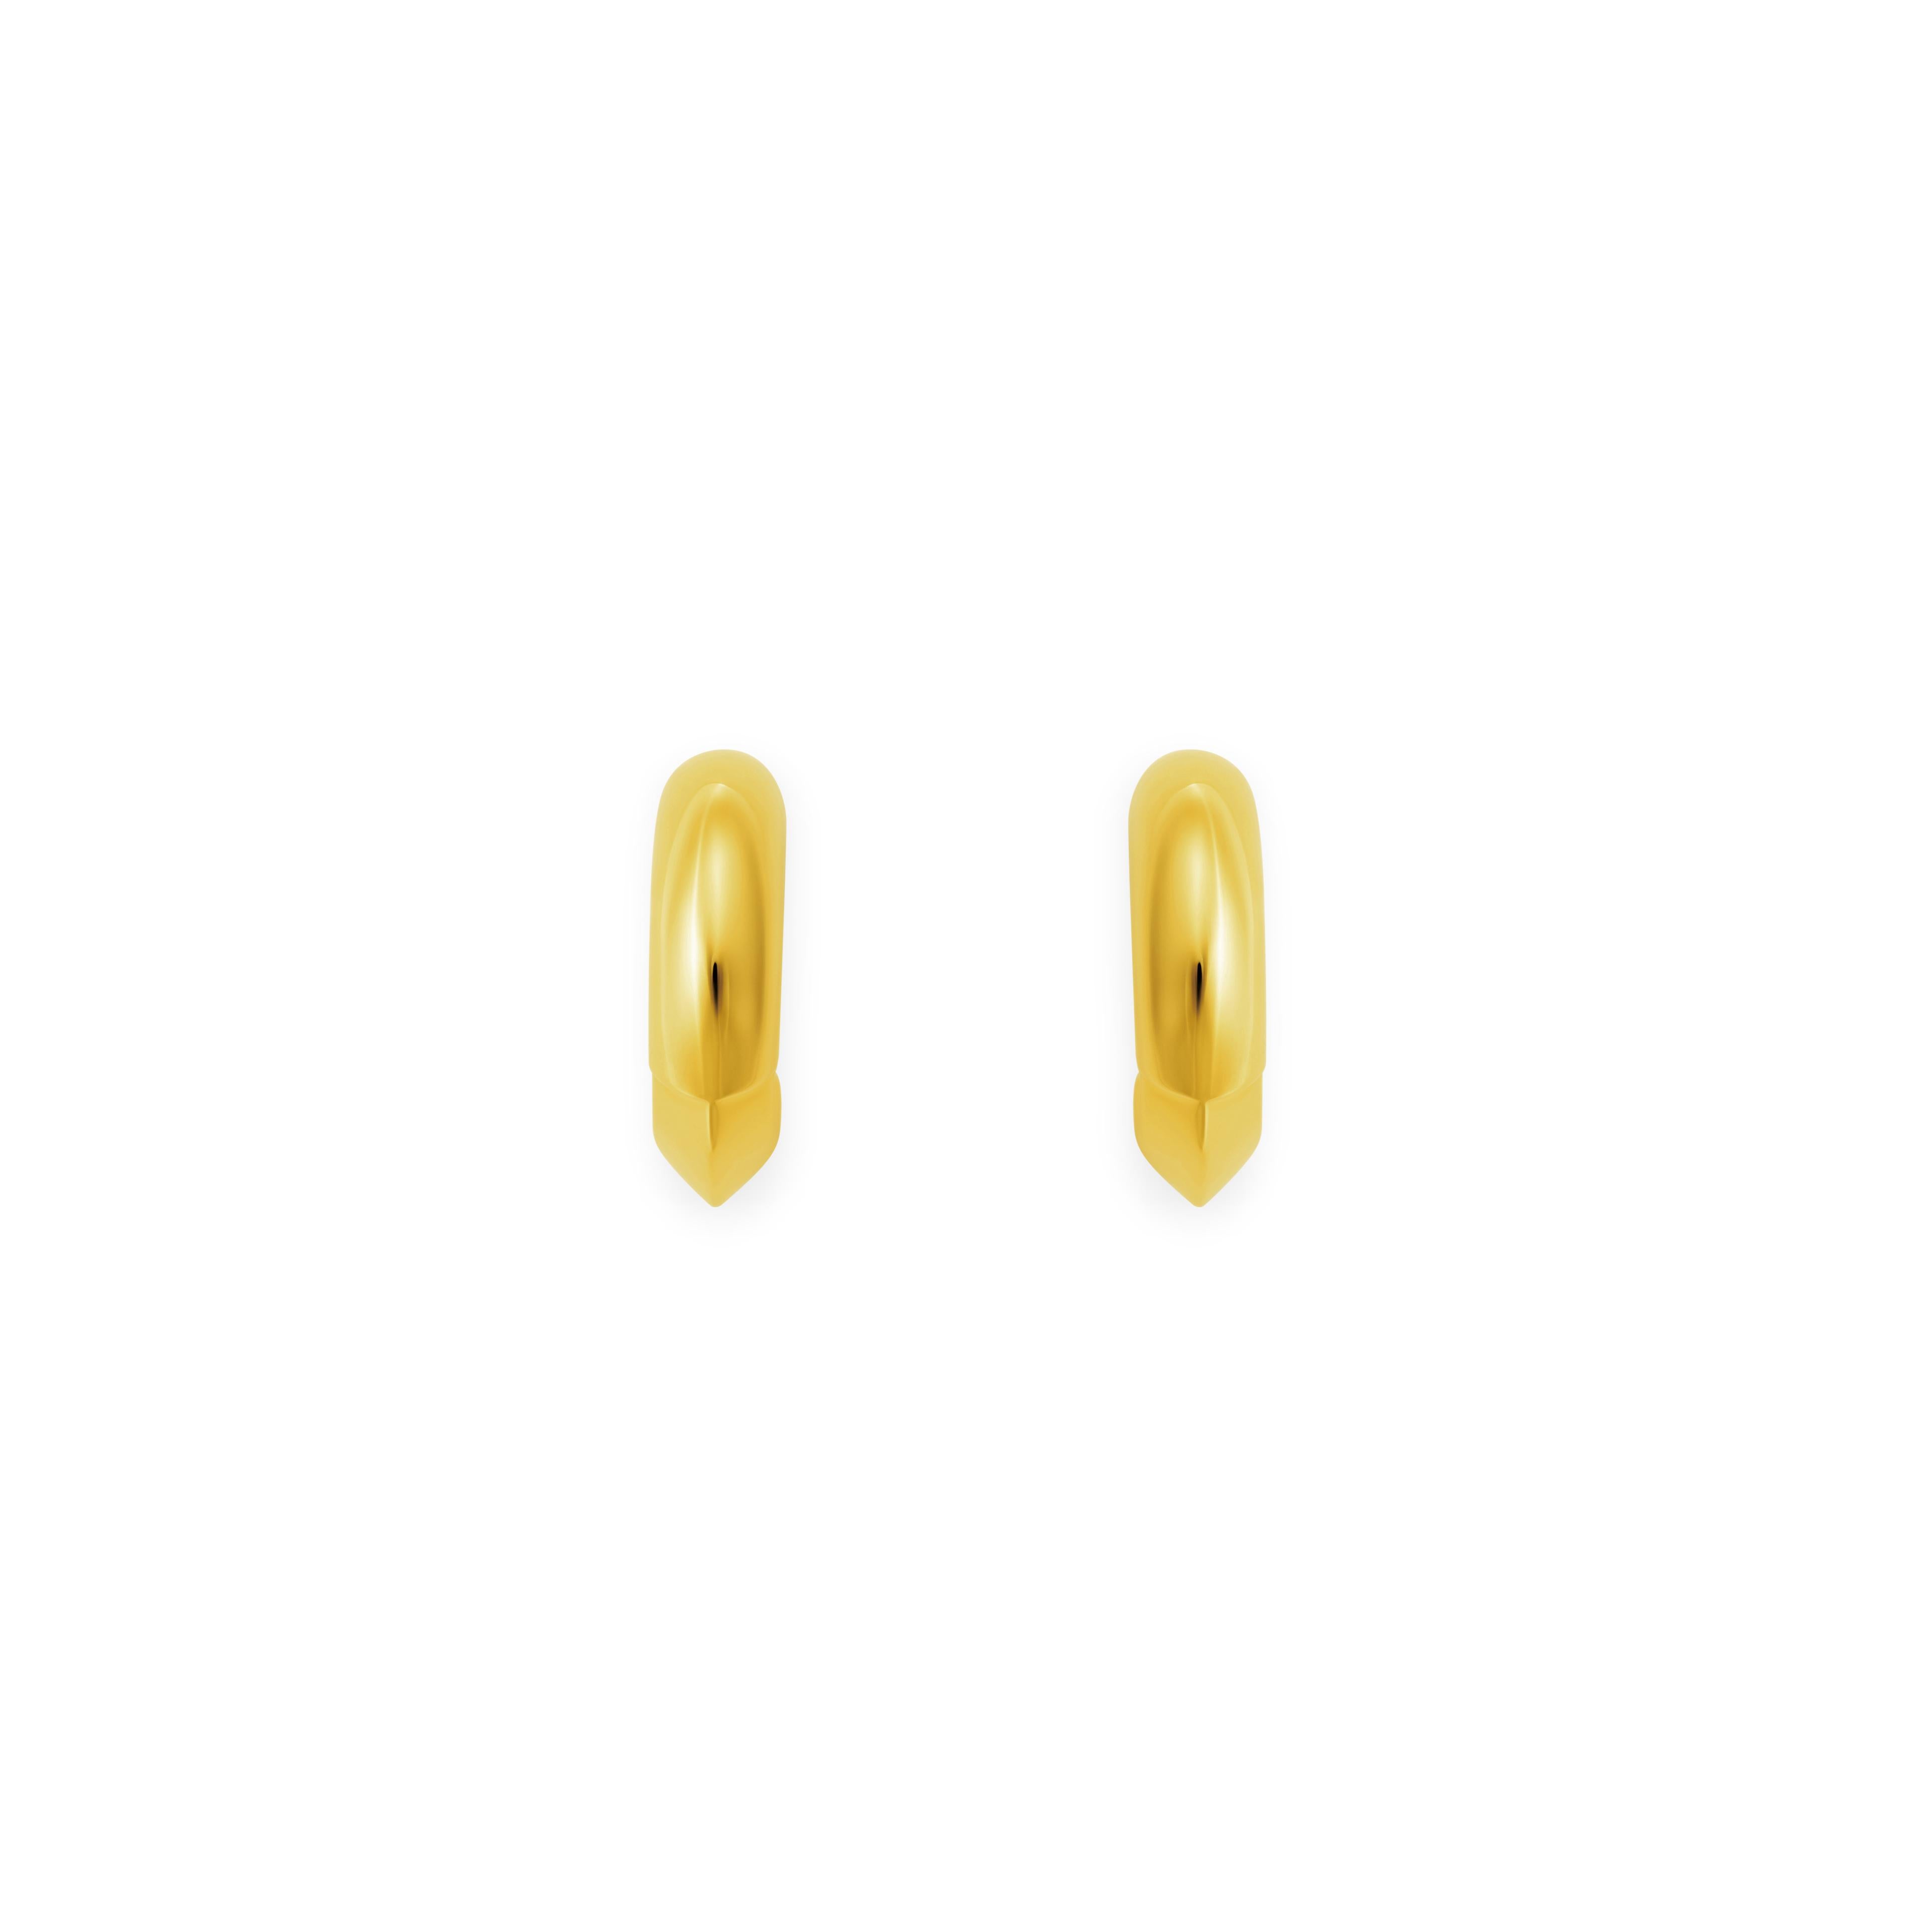 Mistova's Gamma earrings are perfect for everyday, they're made from 18K gold. The design goes from square to round making these classic hoops a piece never to take off. 